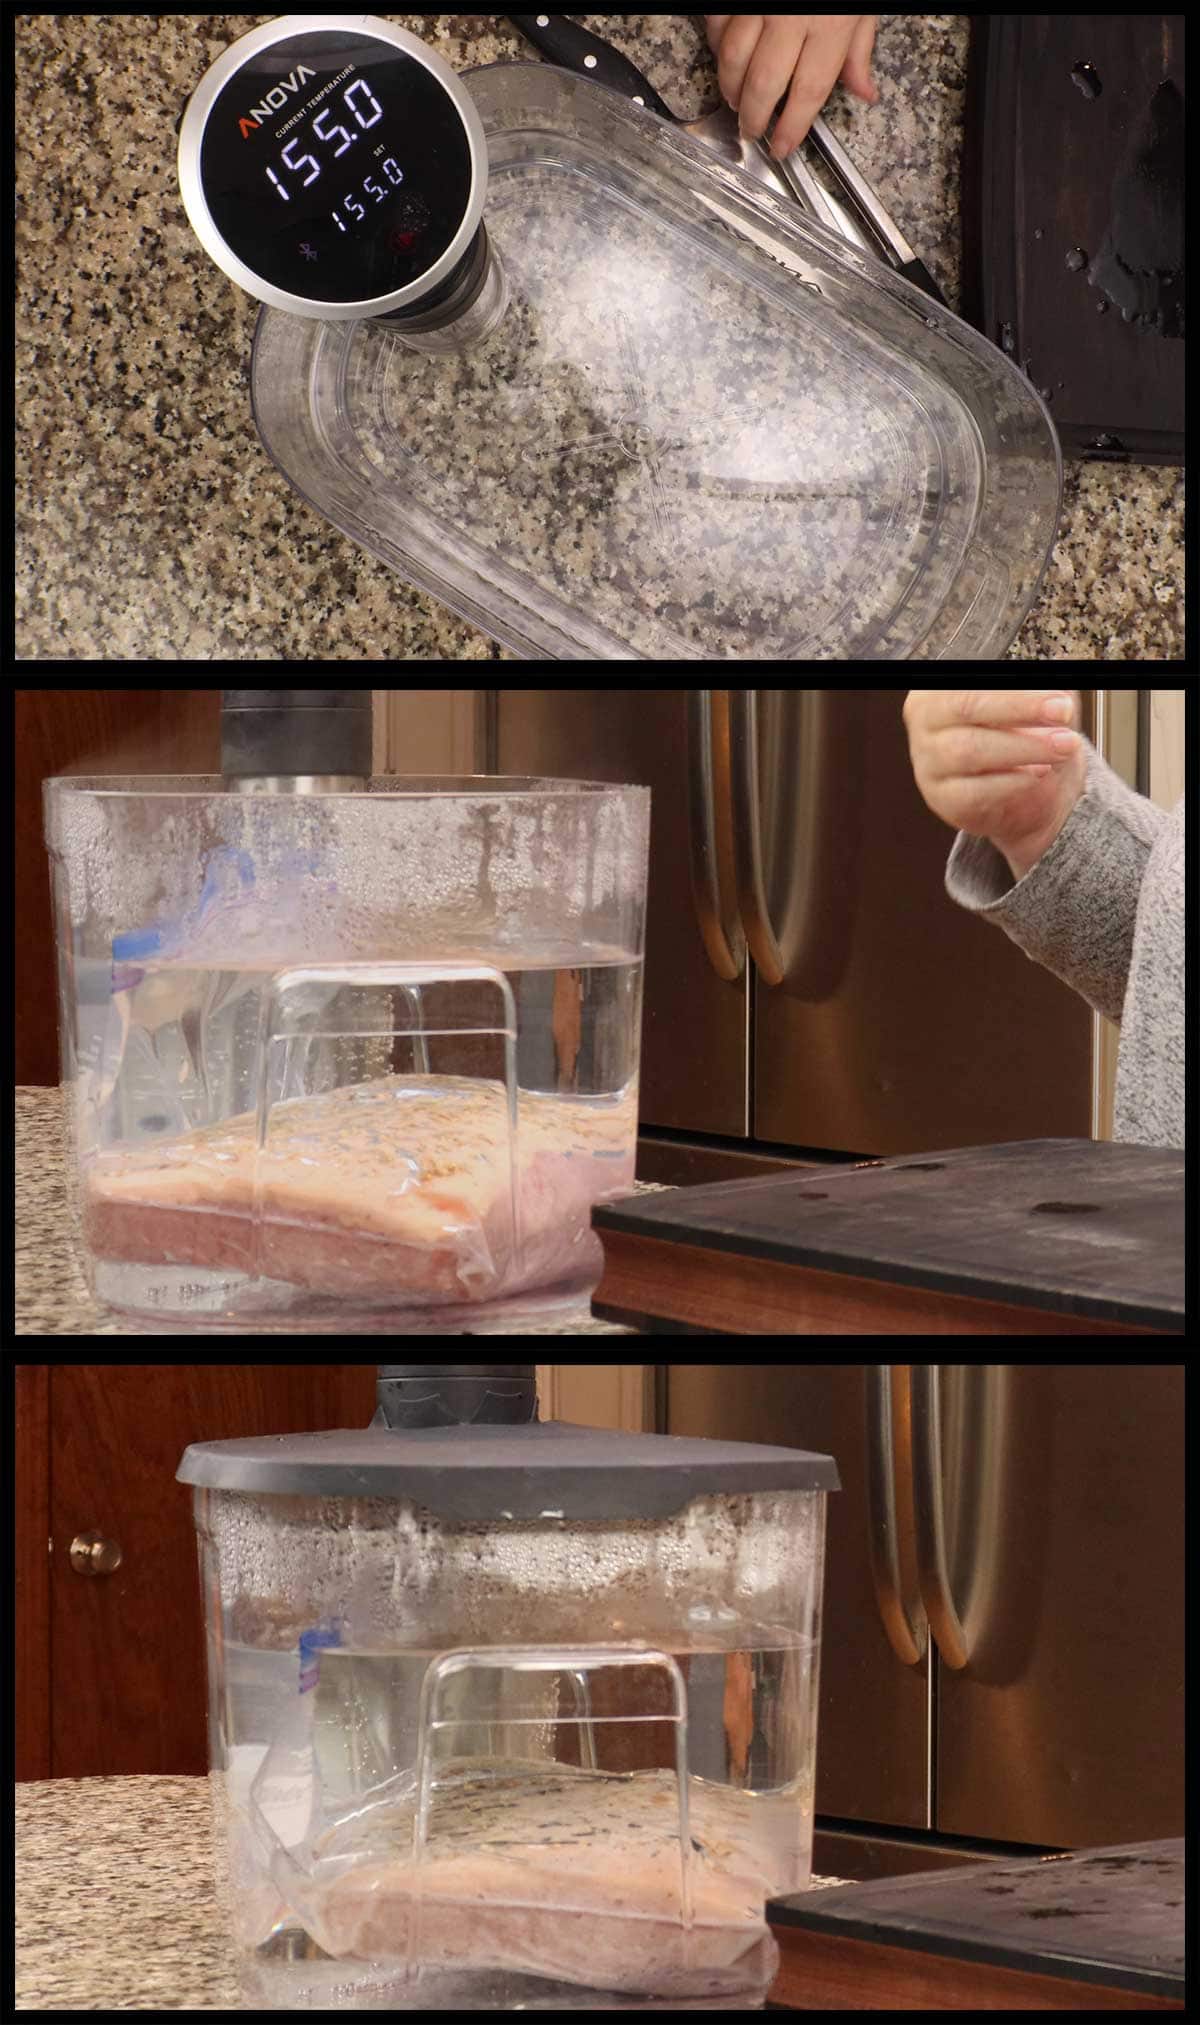 placing the bag with corned beef into the water bath and covering the container.